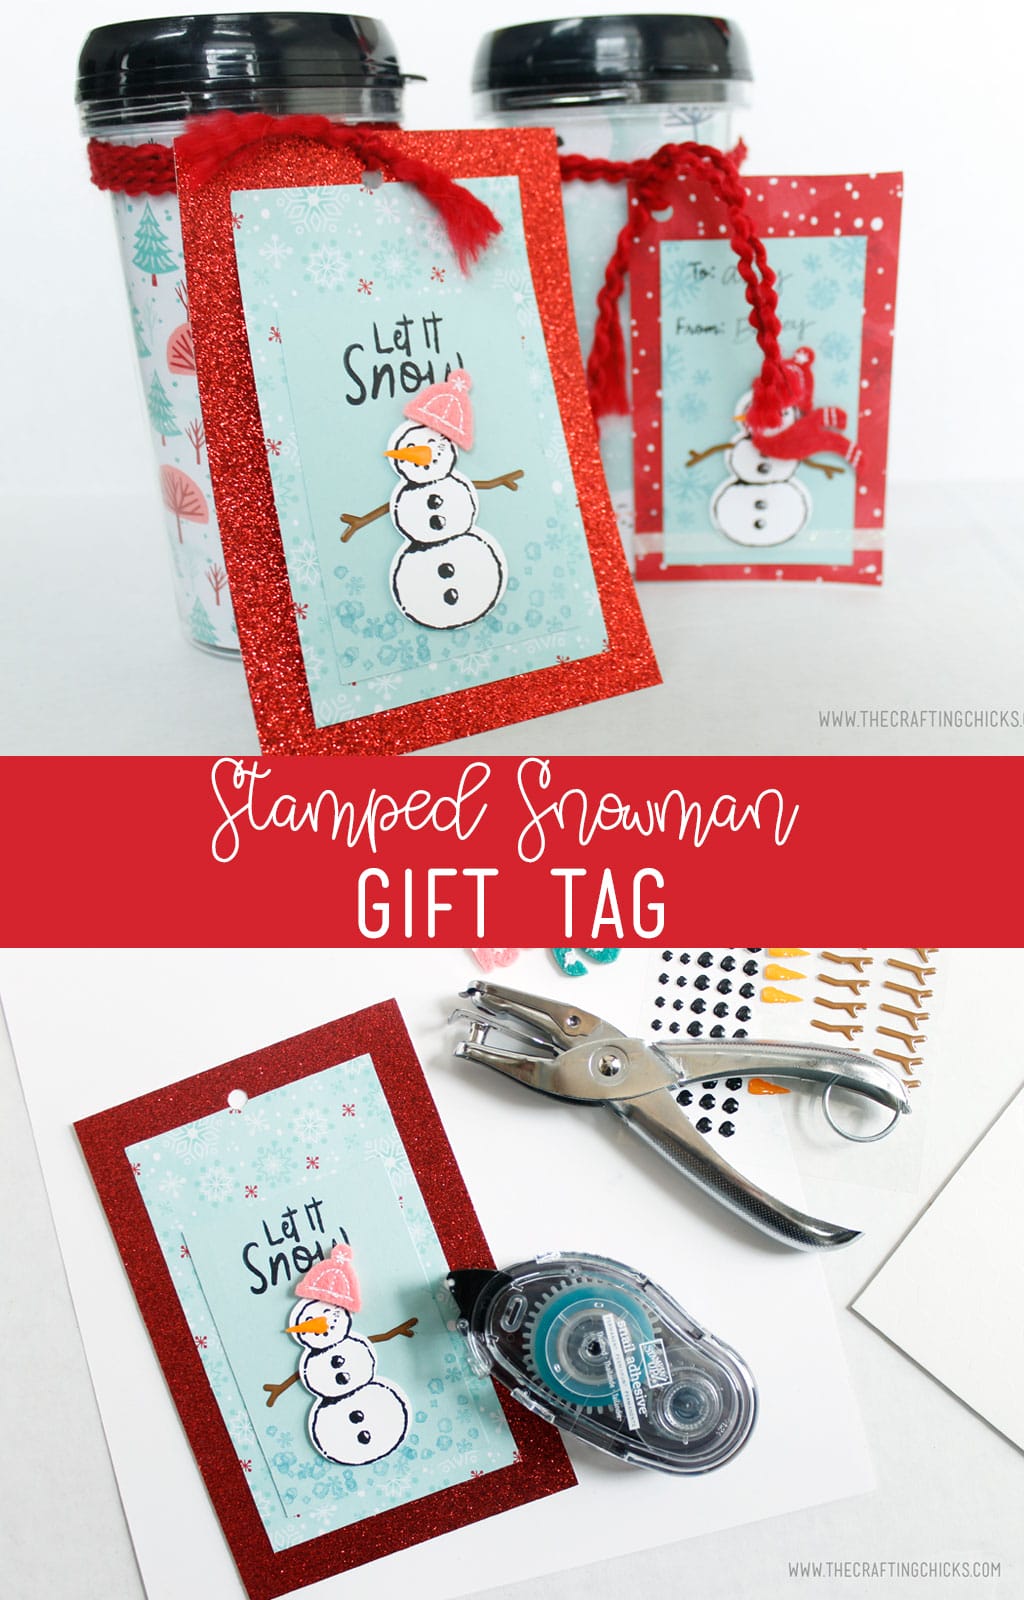 Give your gifts some extra flair with an adorable Stamped Snowman Gift Tag. The perfect way to add creativity to your gifts. #gifttags #snowmangifttag #stamping